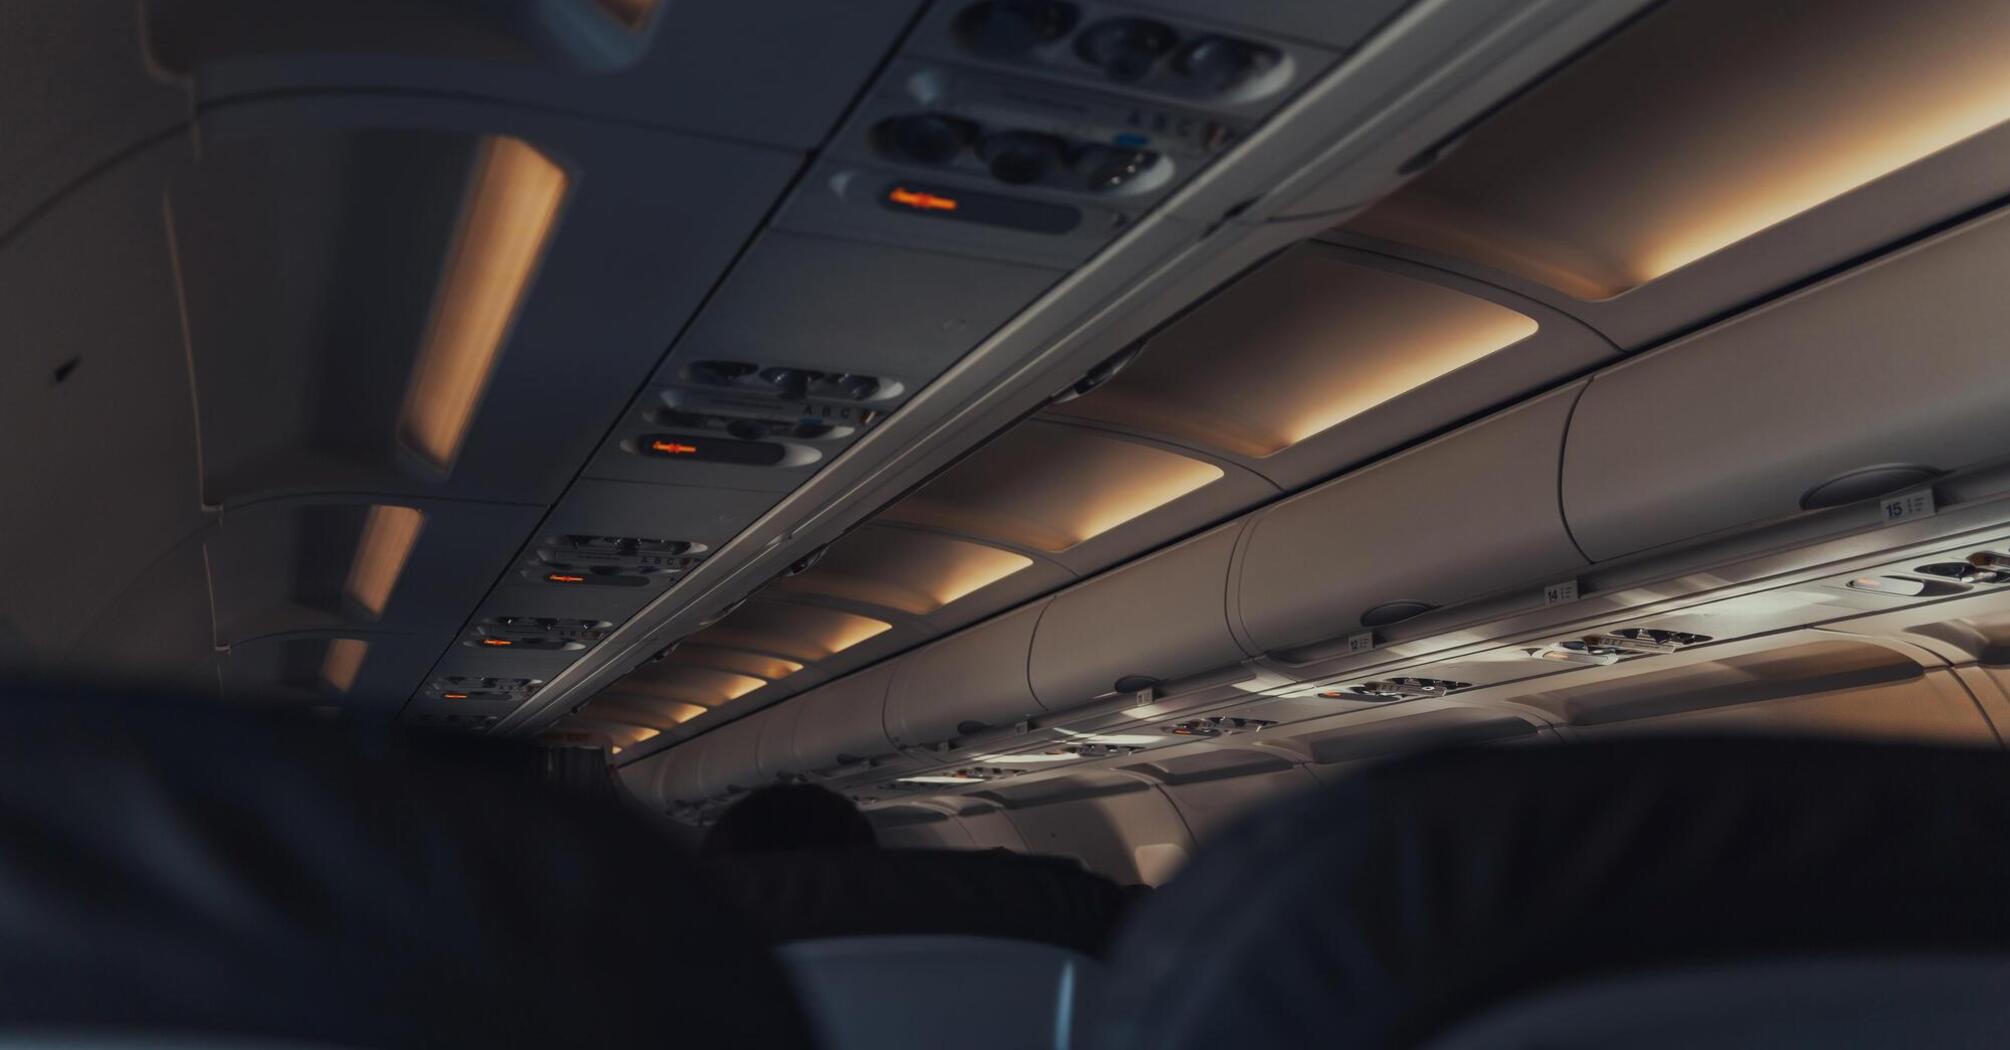 The flight attendant explained the measures he took to avoid getting sick on board